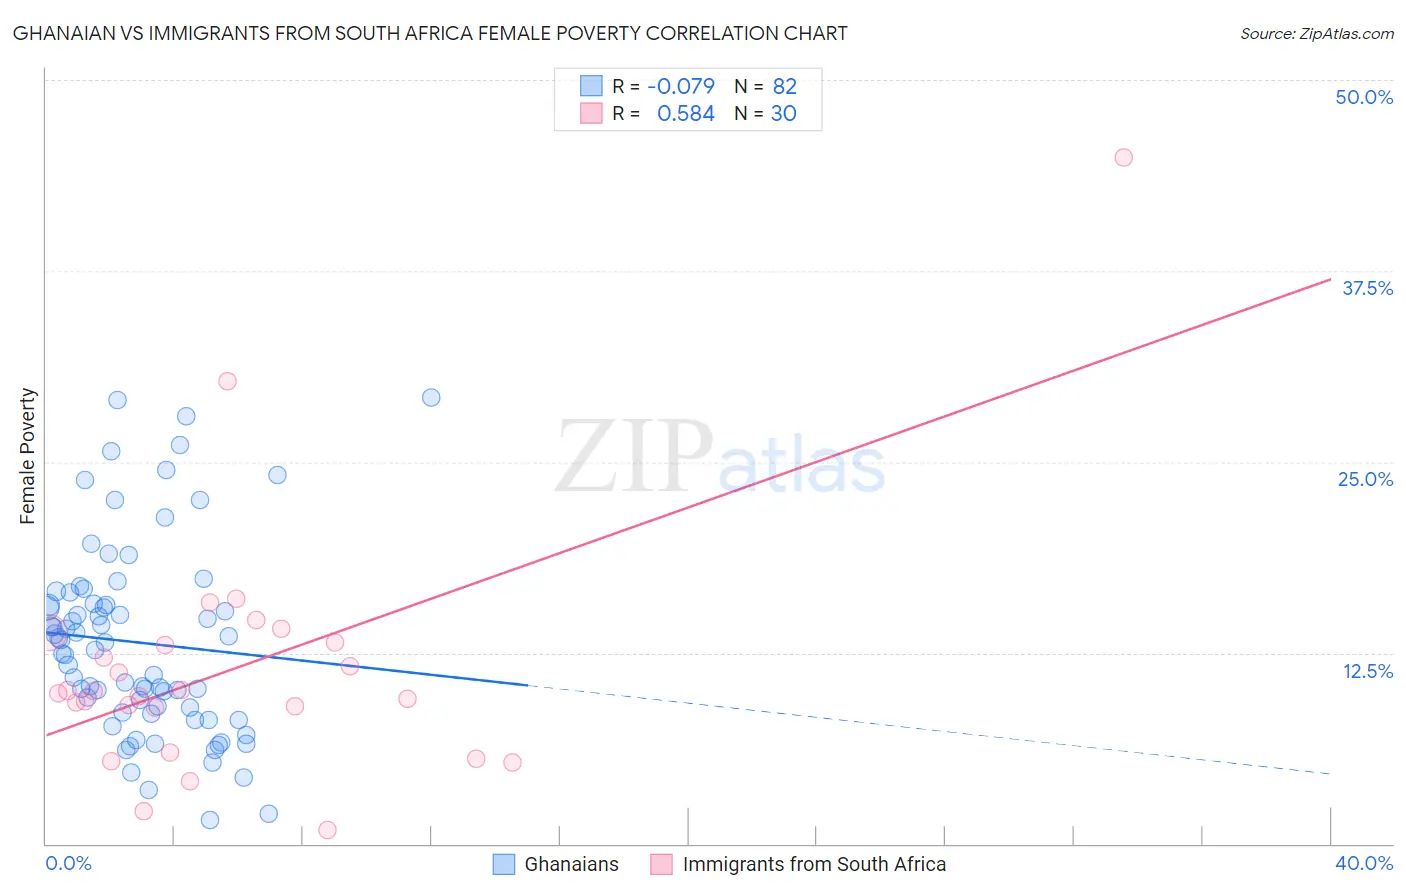 Ghanaian vs Immigrants from South Africa Female Poverty